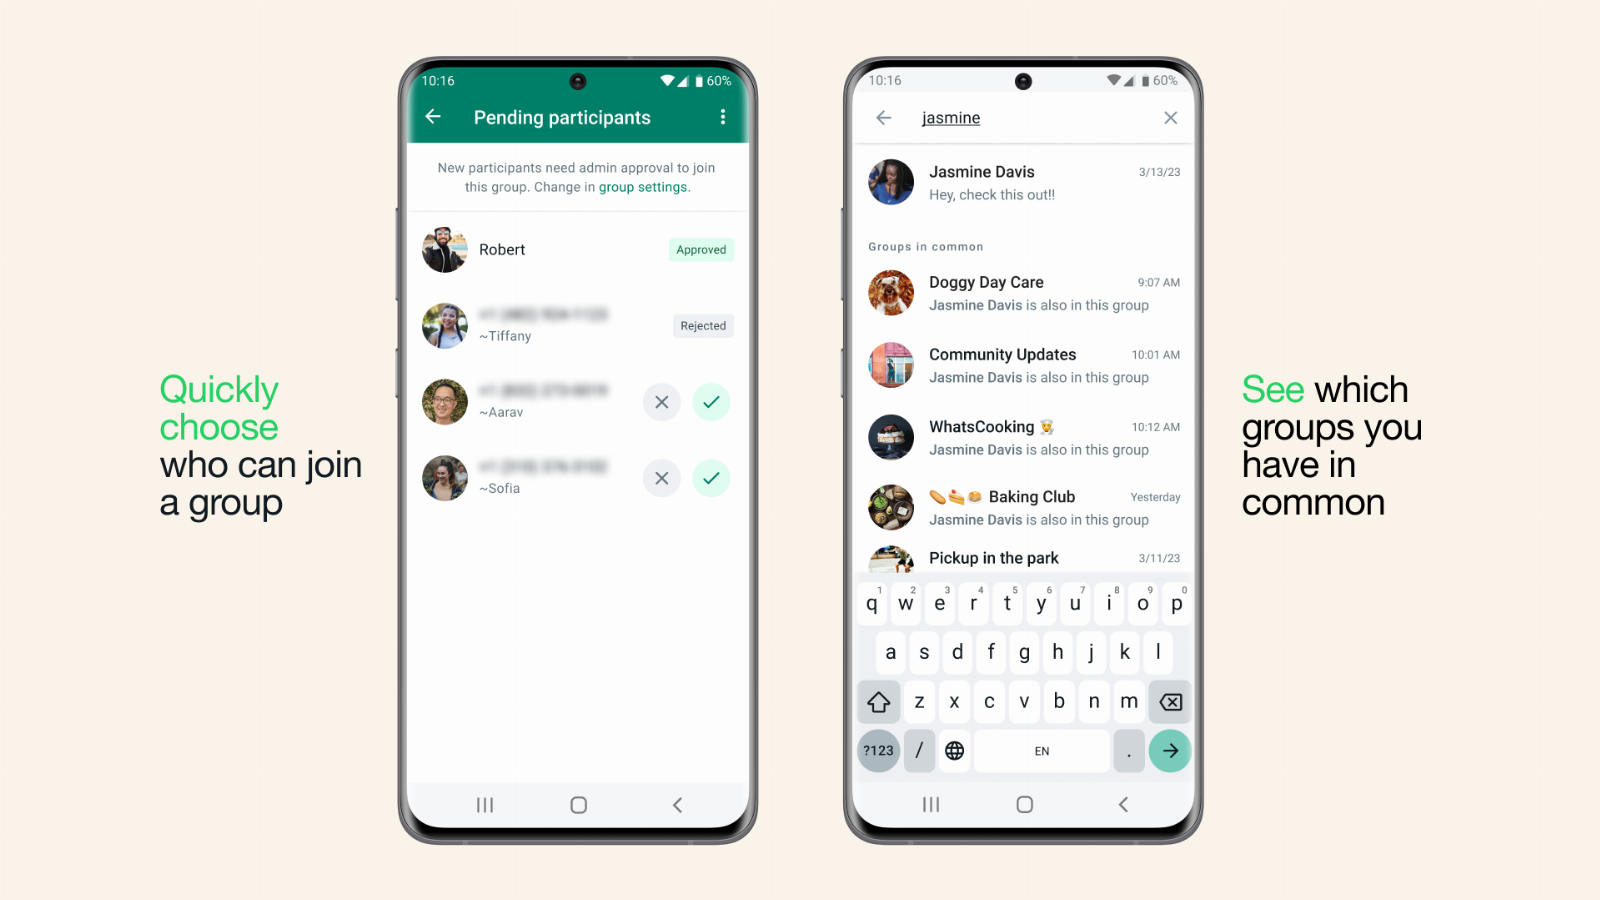 WhatsApp’s new feature gives admins an easier way to control who can join a group